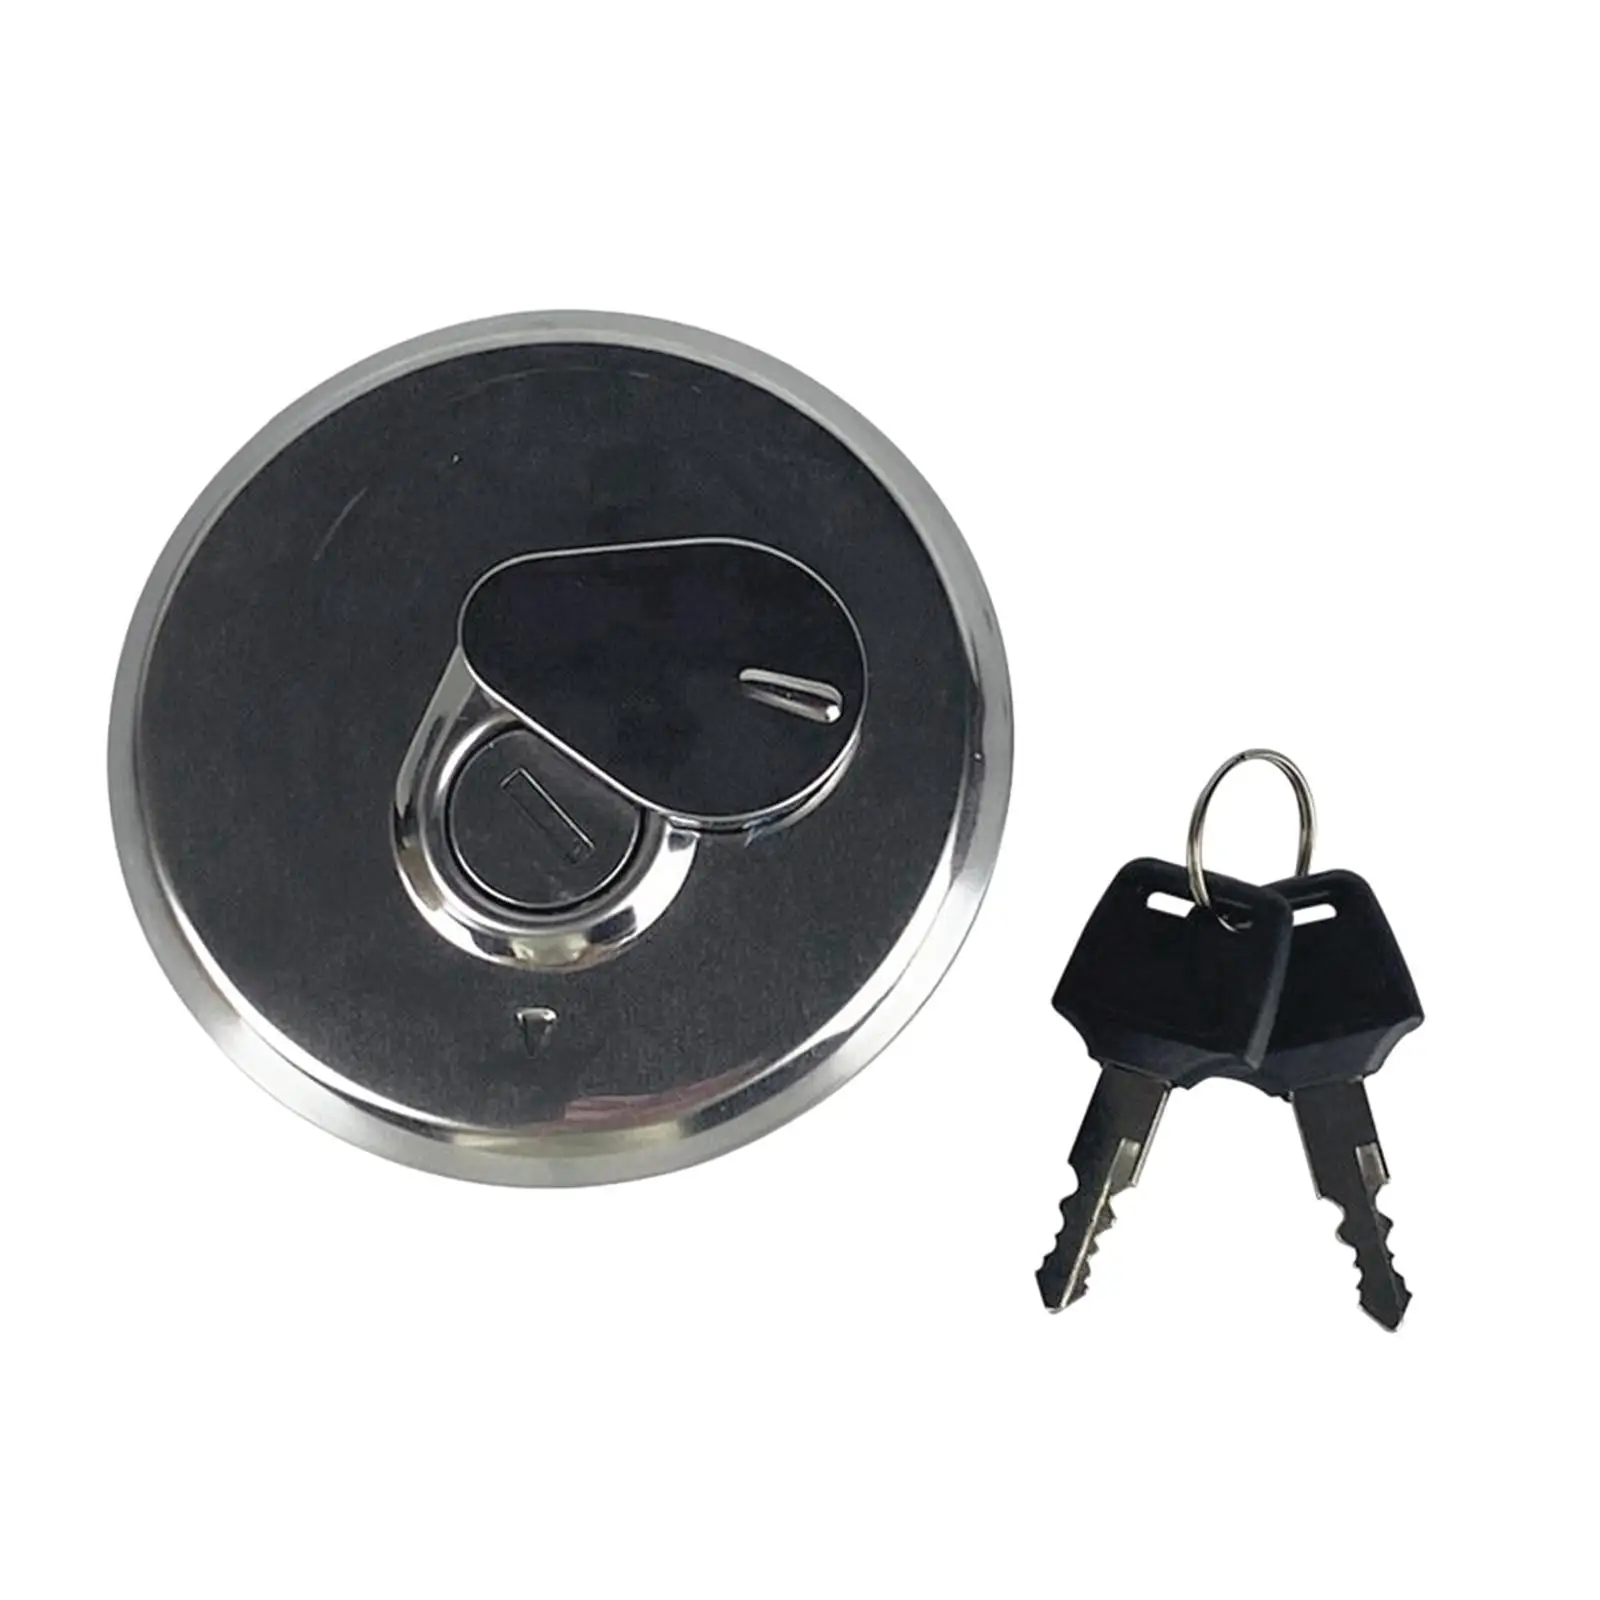 Motorcycle Fuel Gas Tank Cap Cover with Lock Keys for Suzuki Gn125